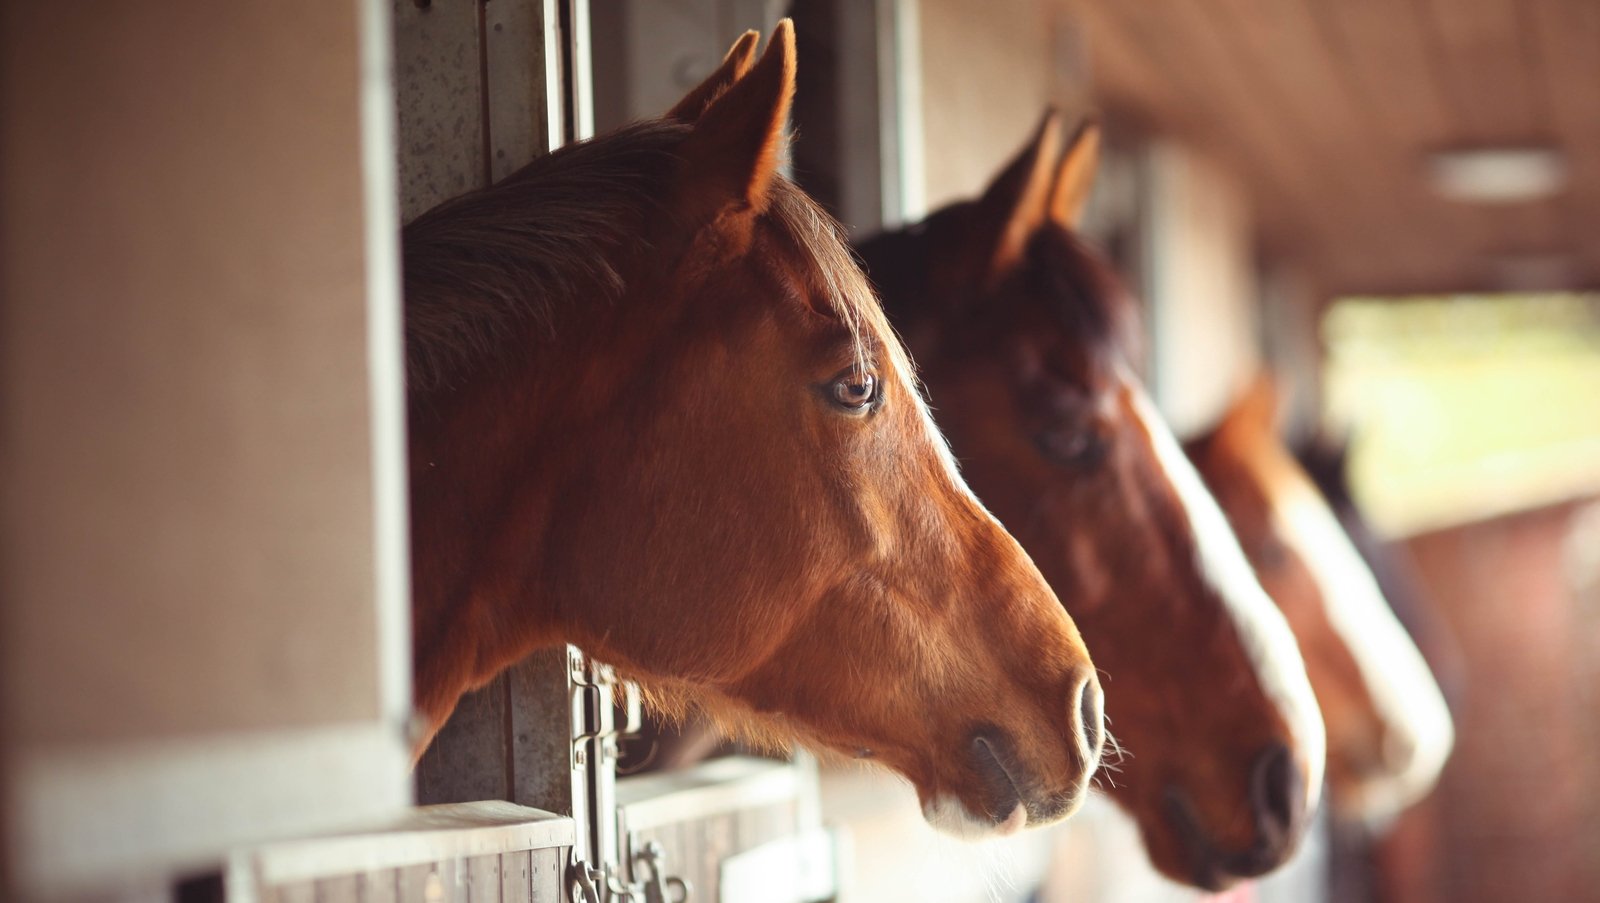 Stop feeding the horse as the manufacturer is looking for contamination

